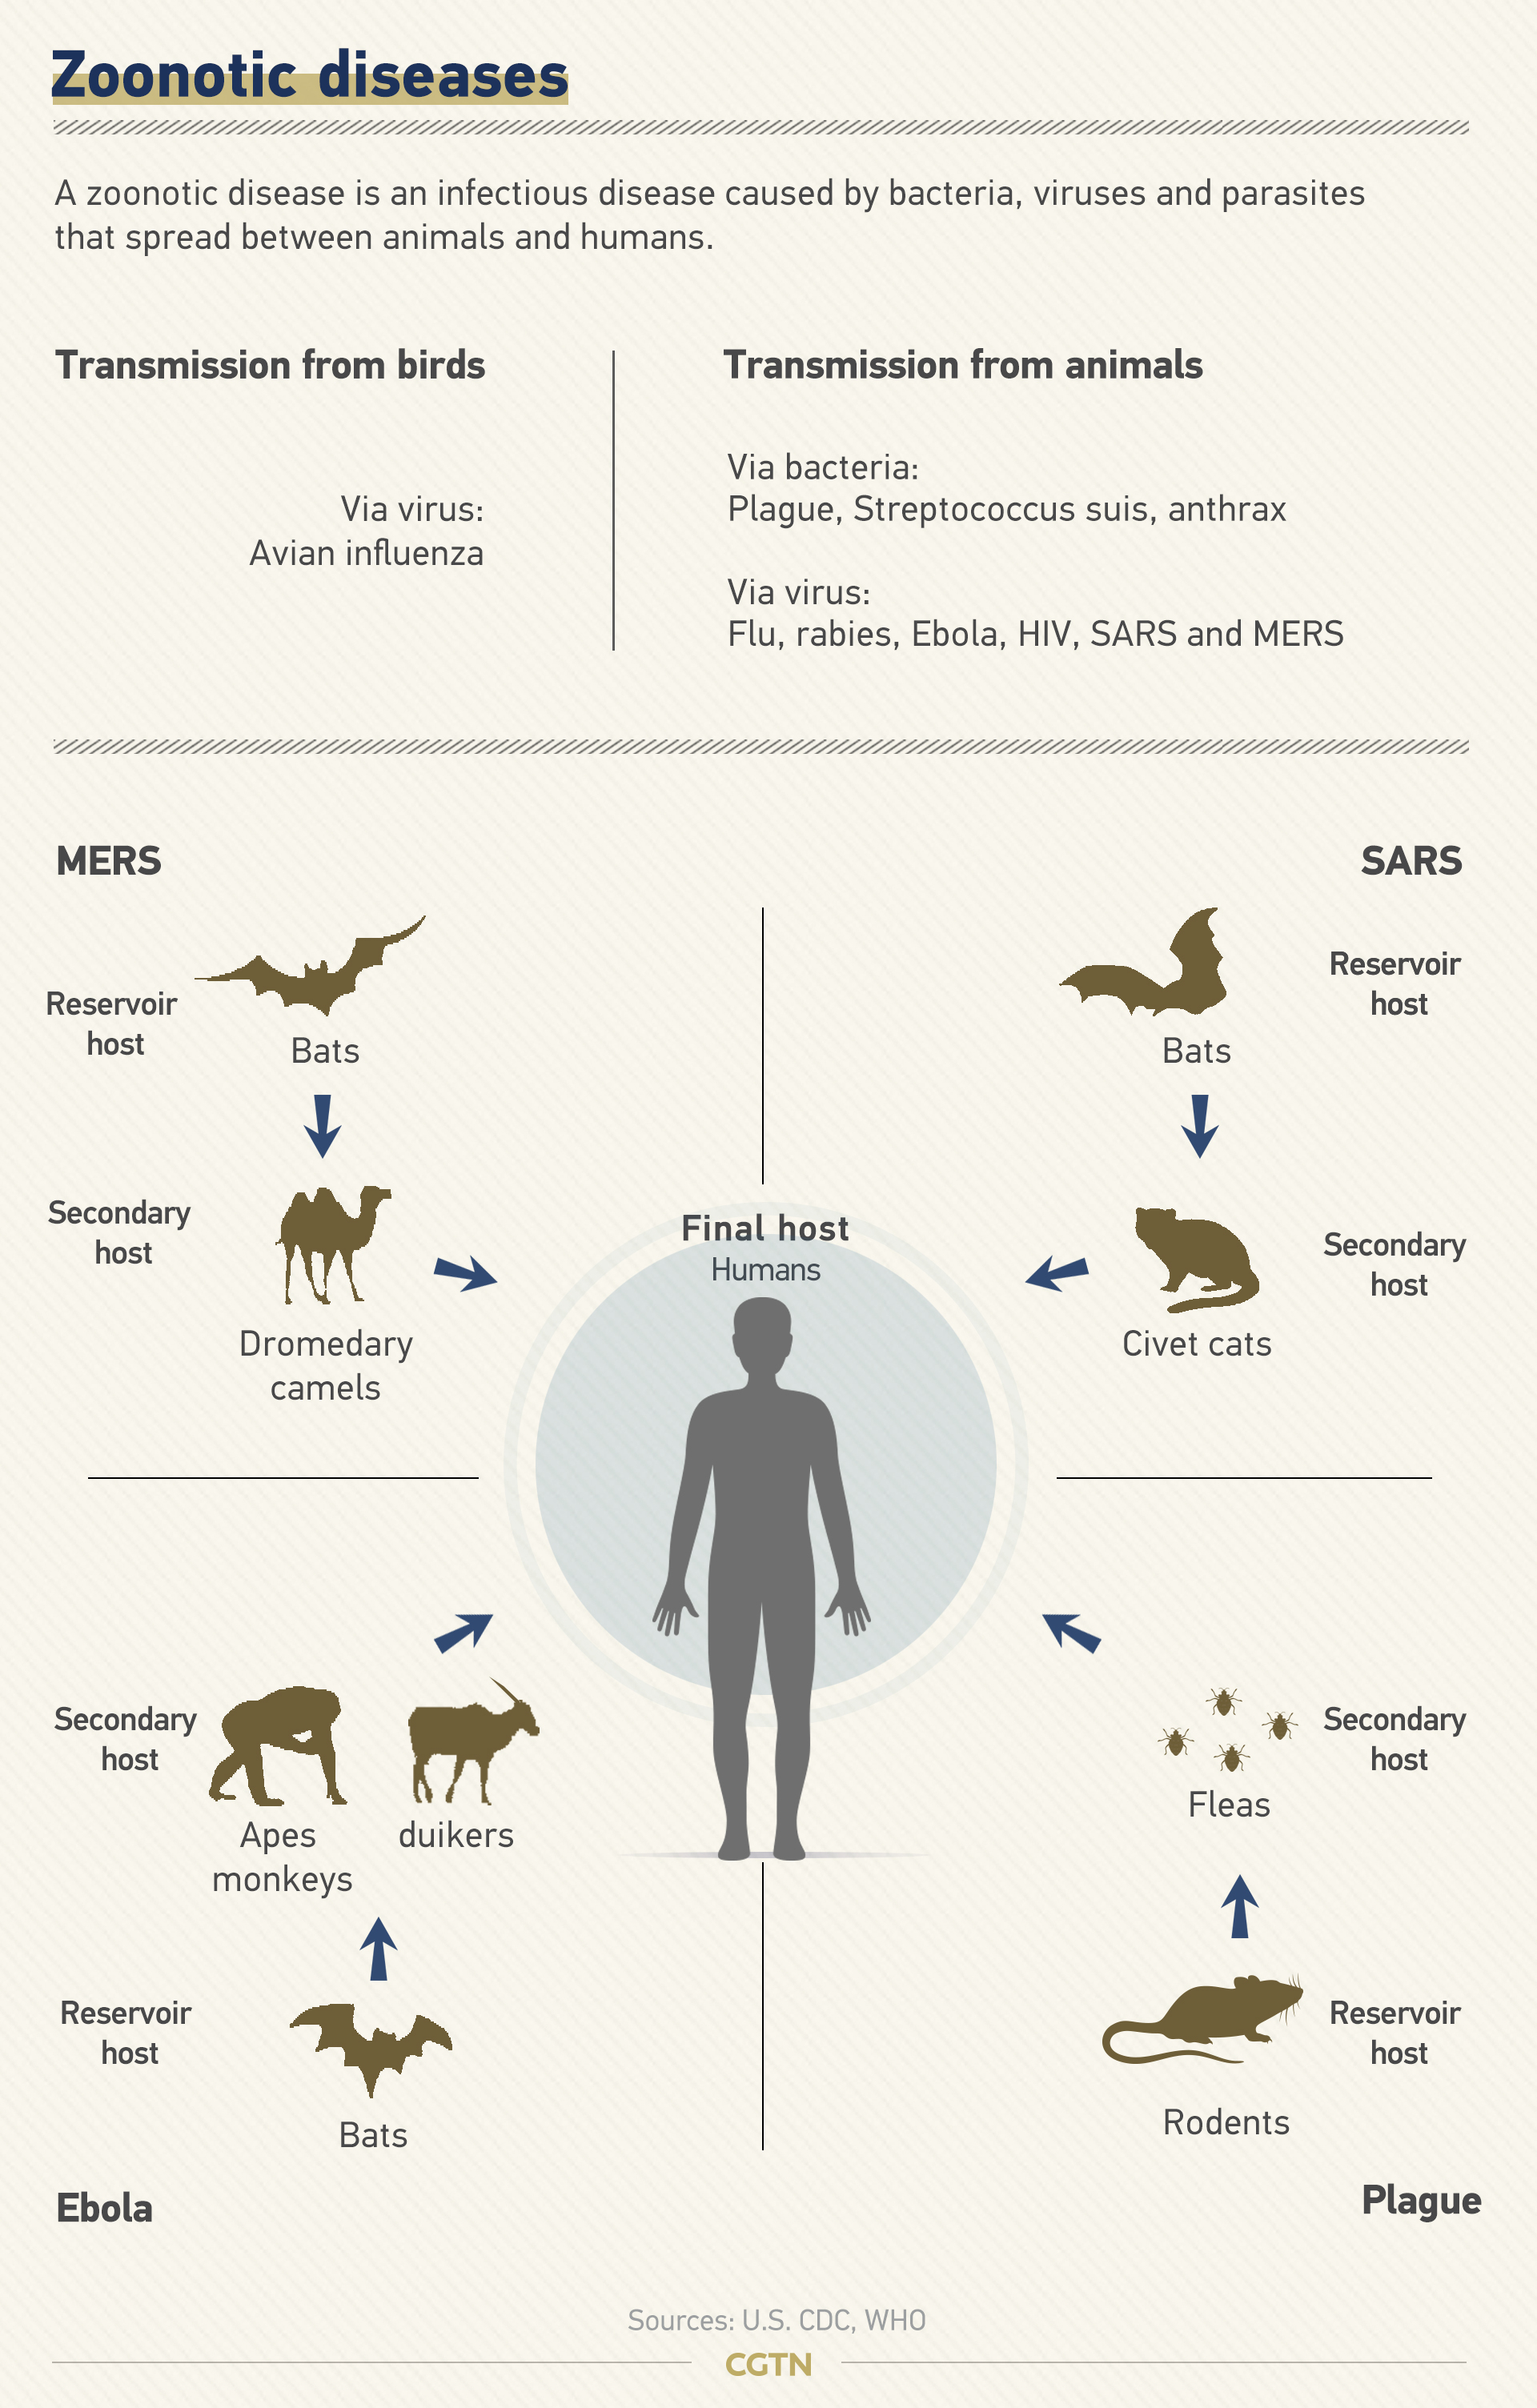 Graphics: How are wild animals linked to an epidemic? - CGTN